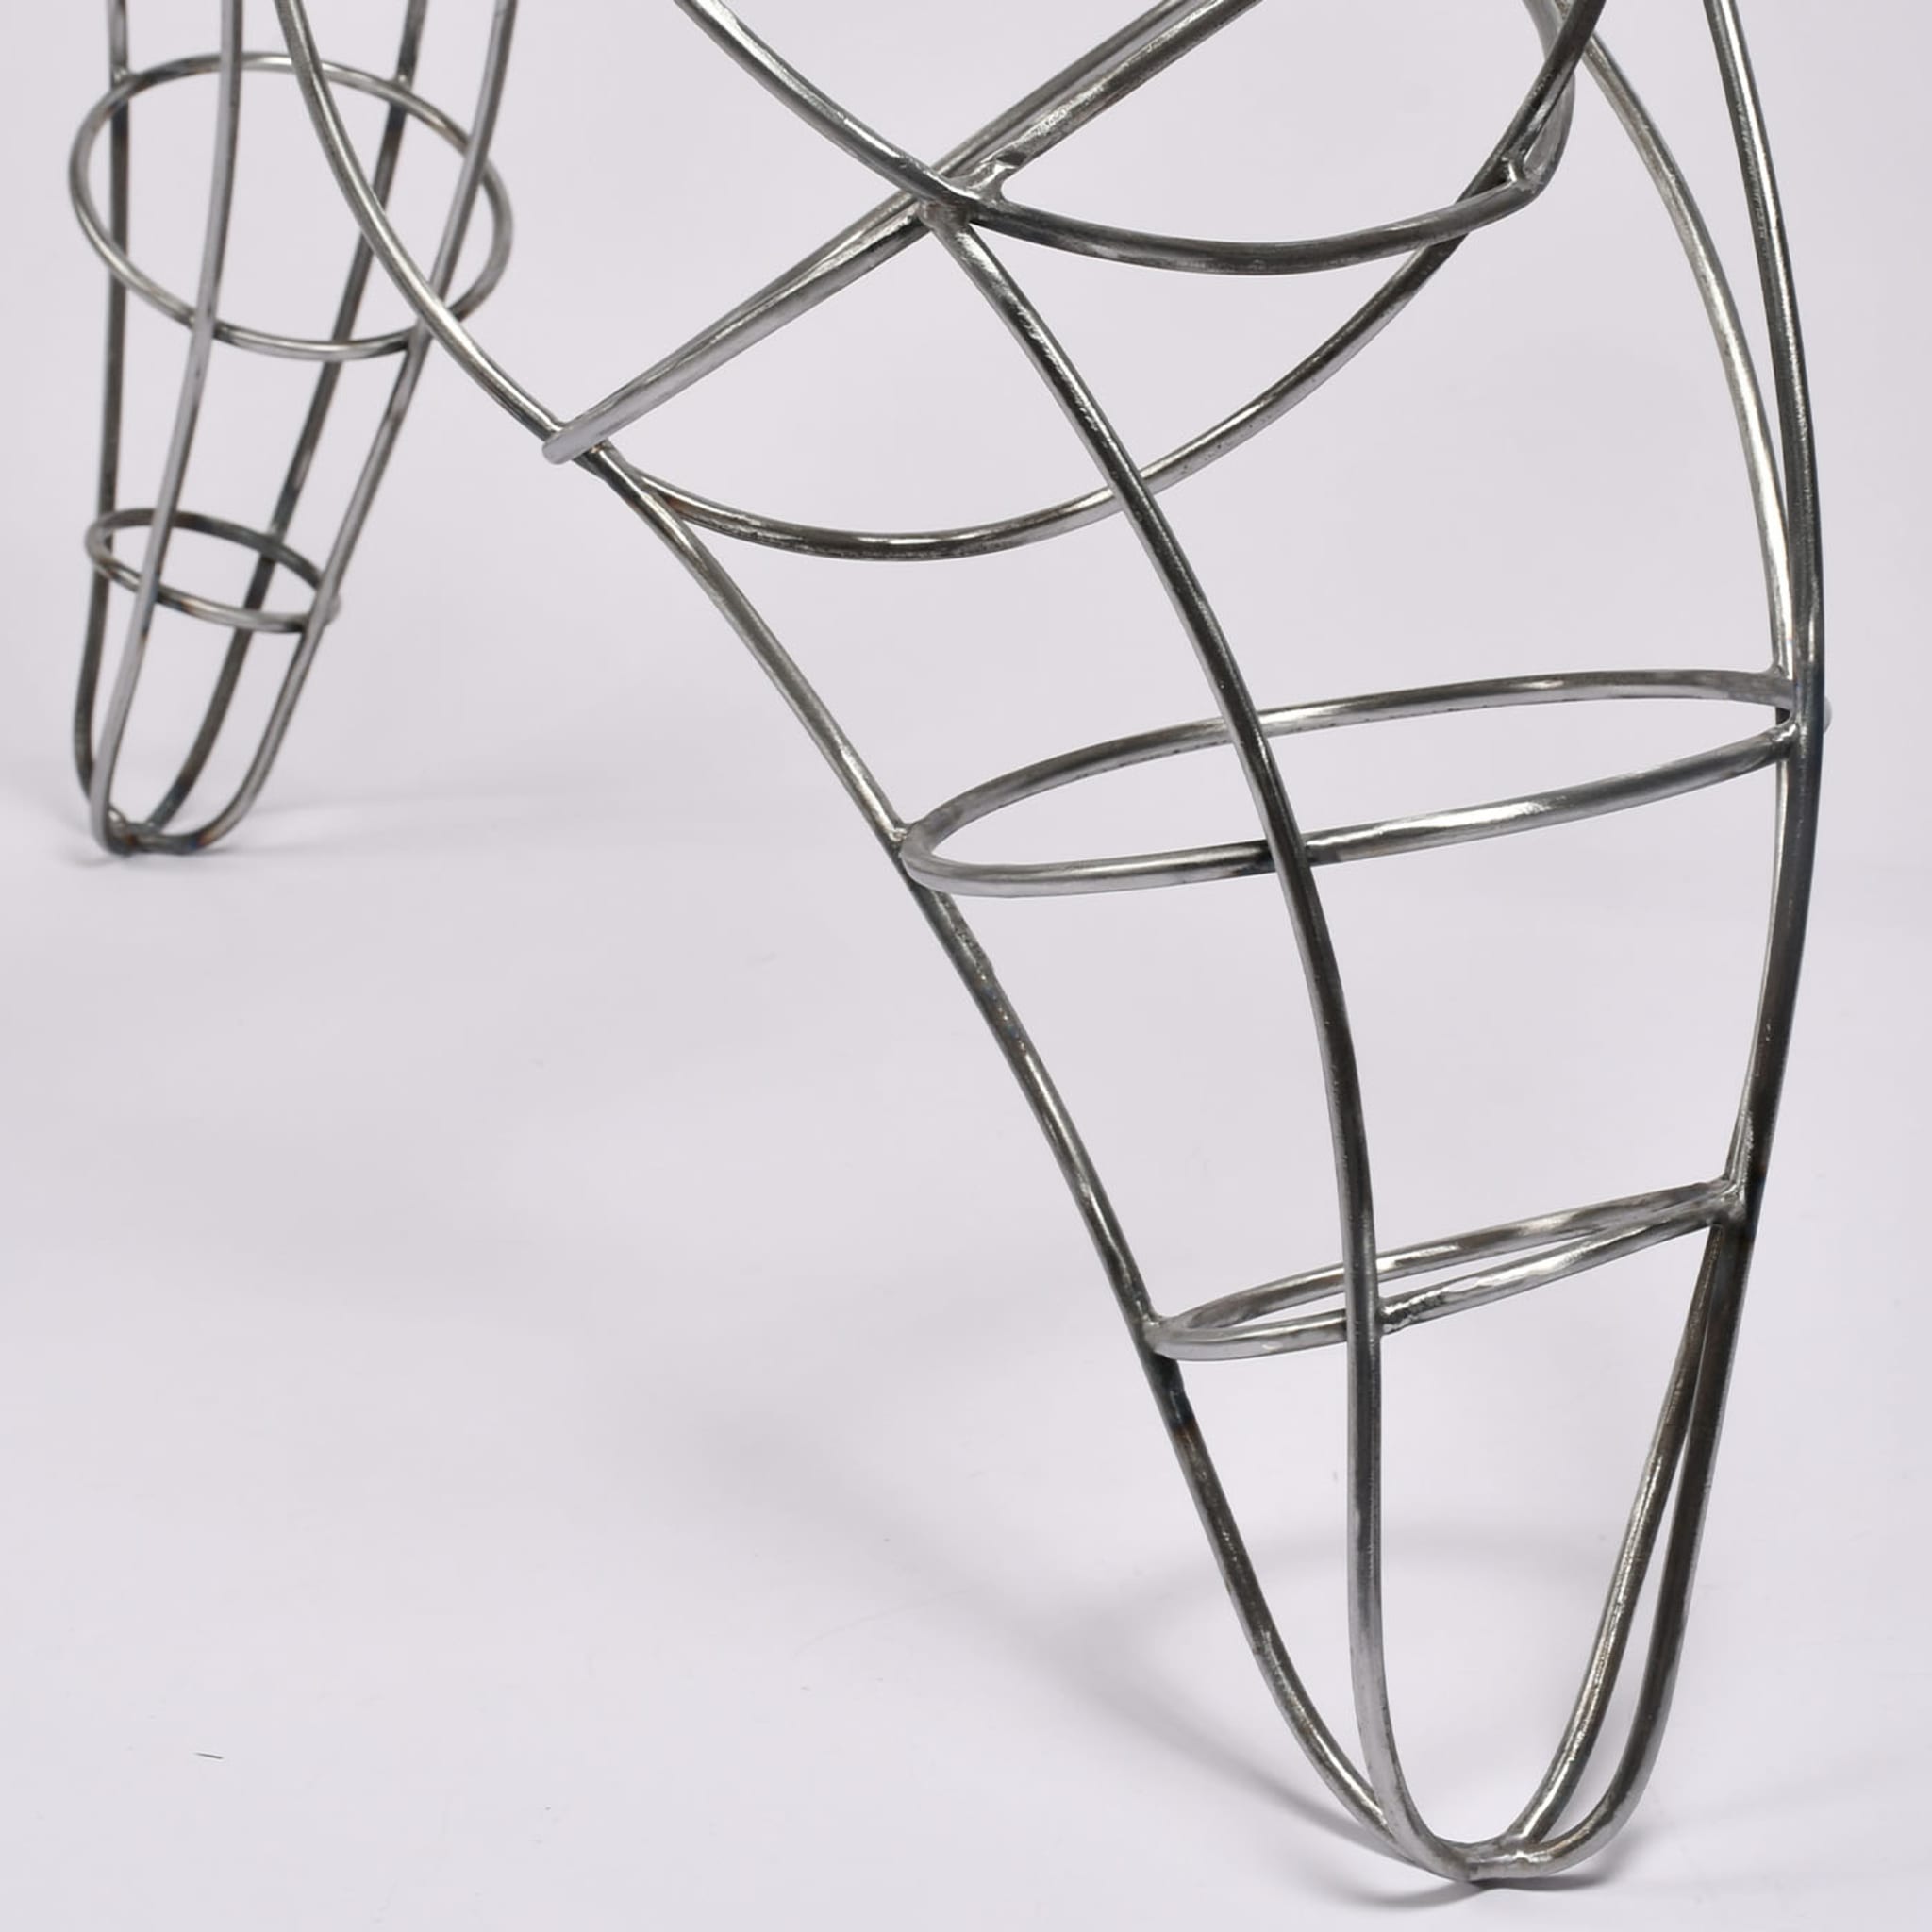 Harmony in Motion Metal Sculpture - Alternative view 4